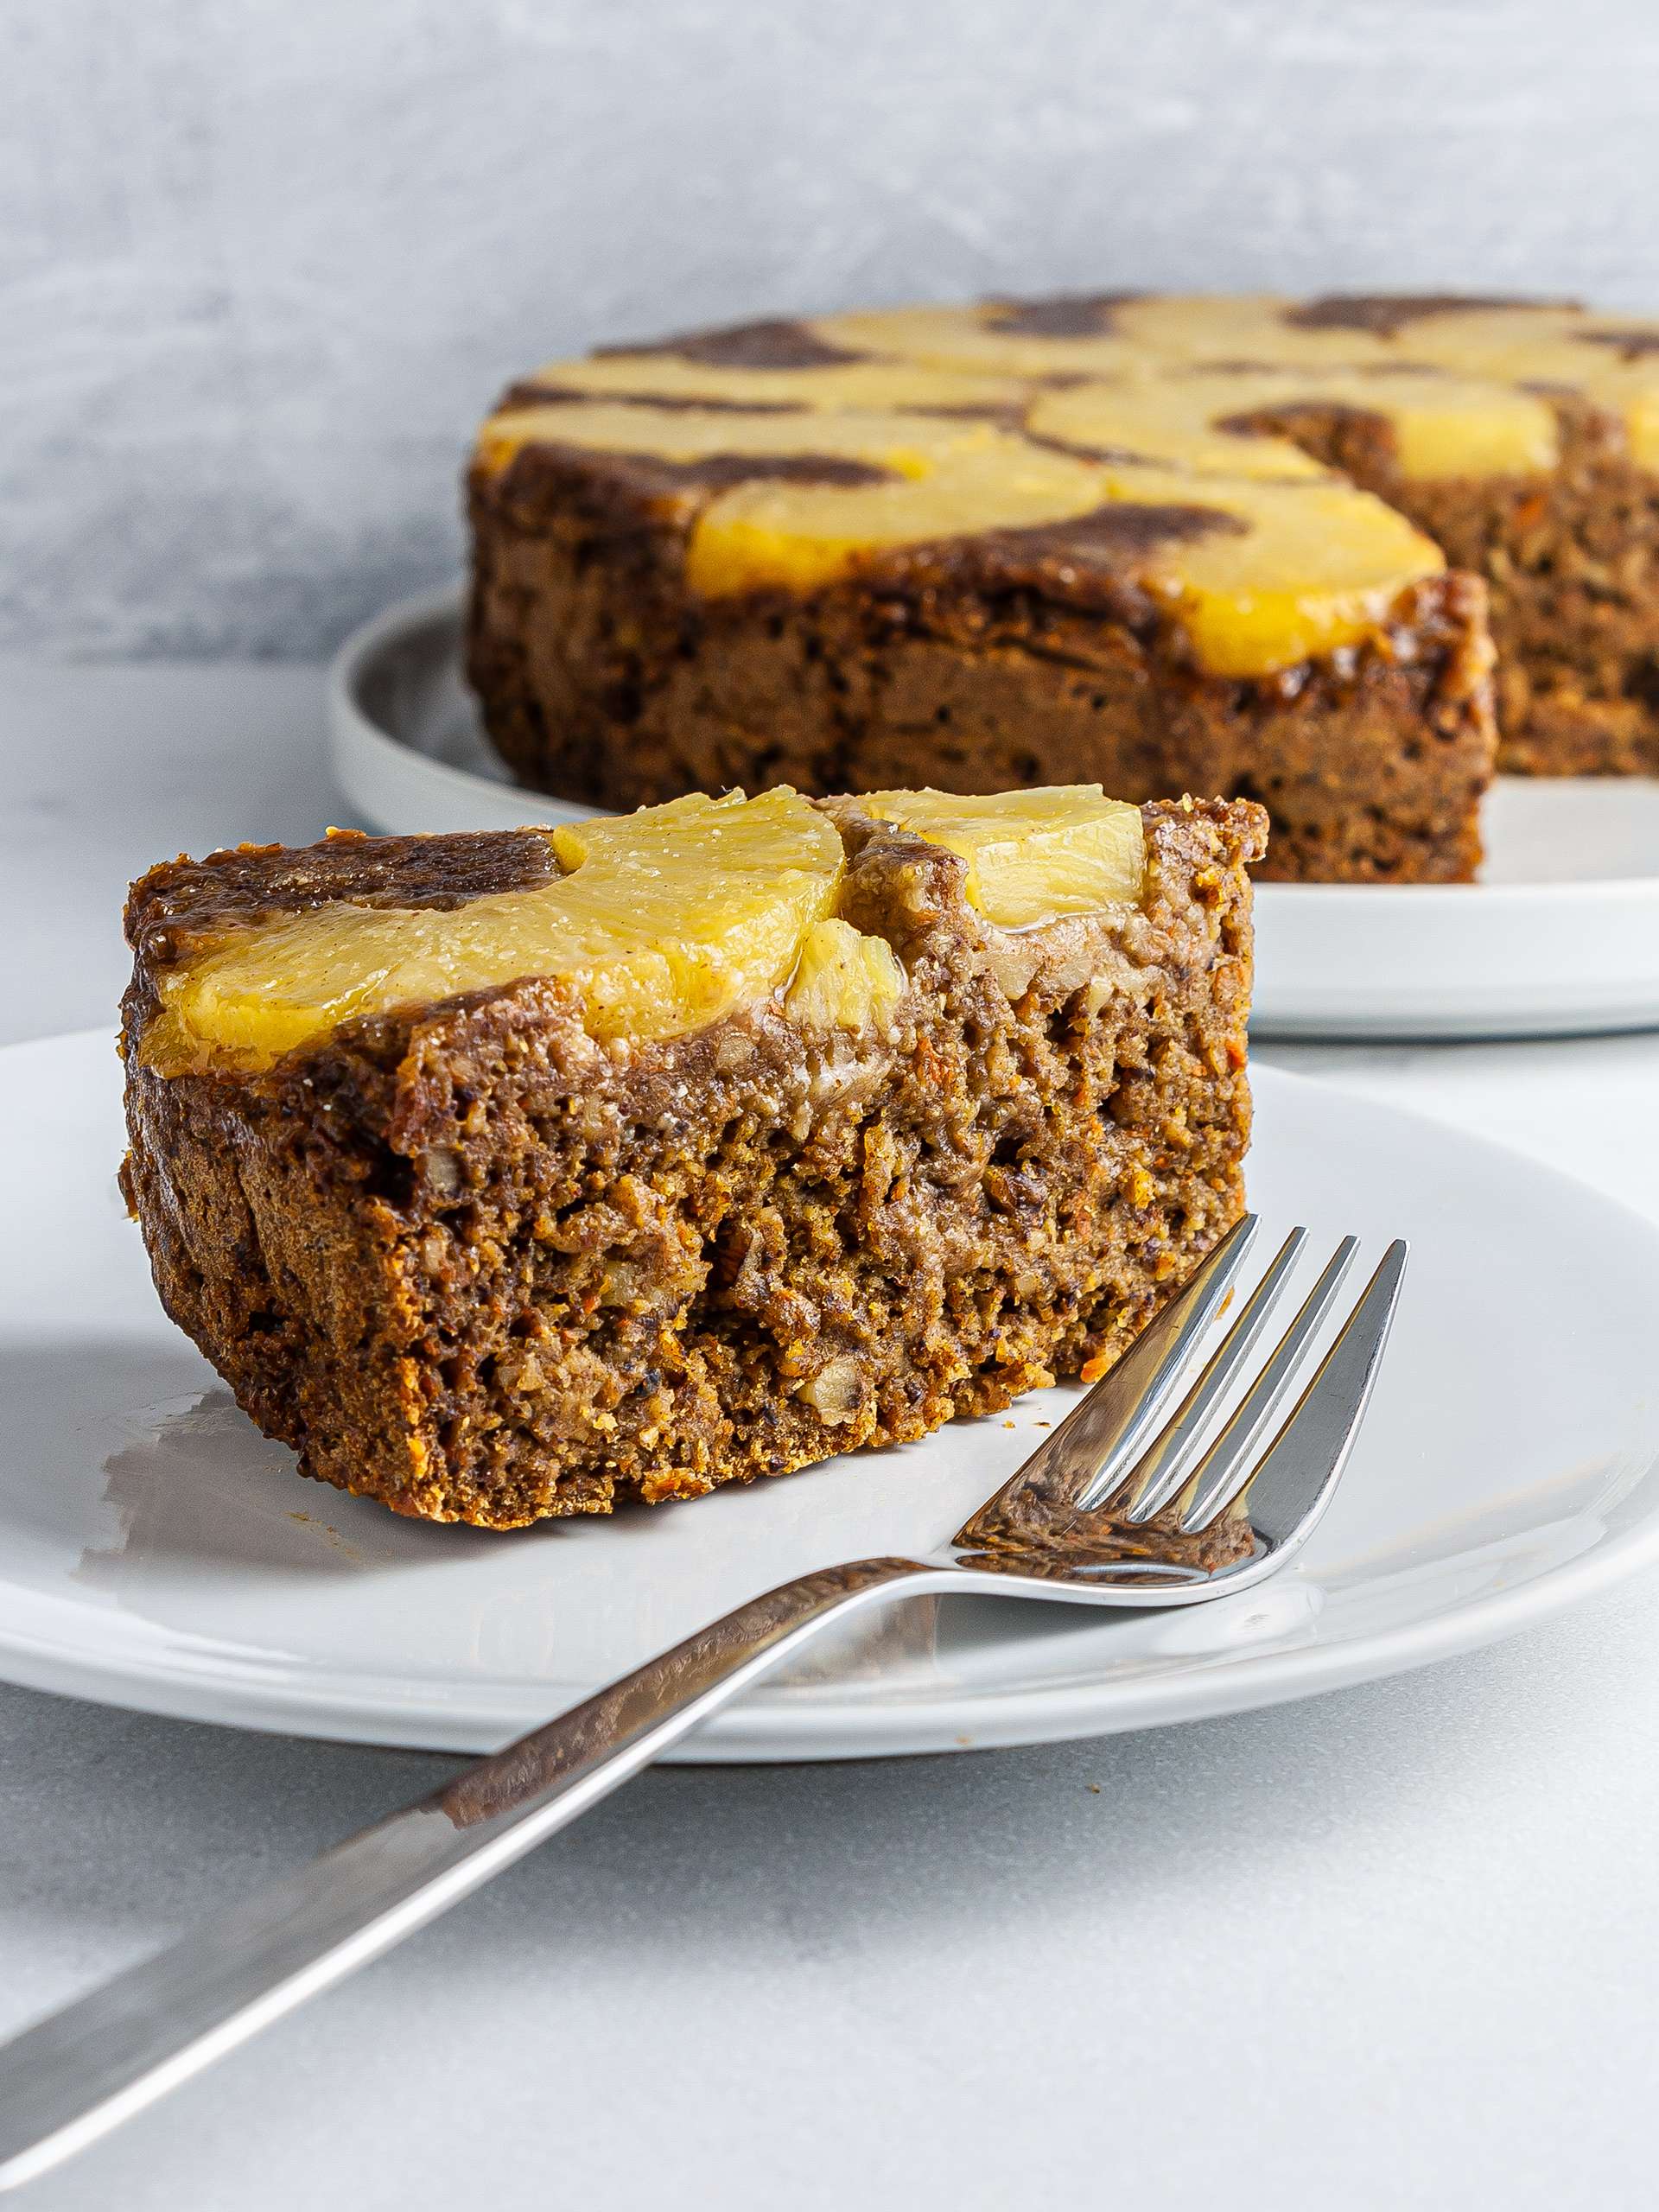 Gluten-Free Carrot Cake with Pineapple